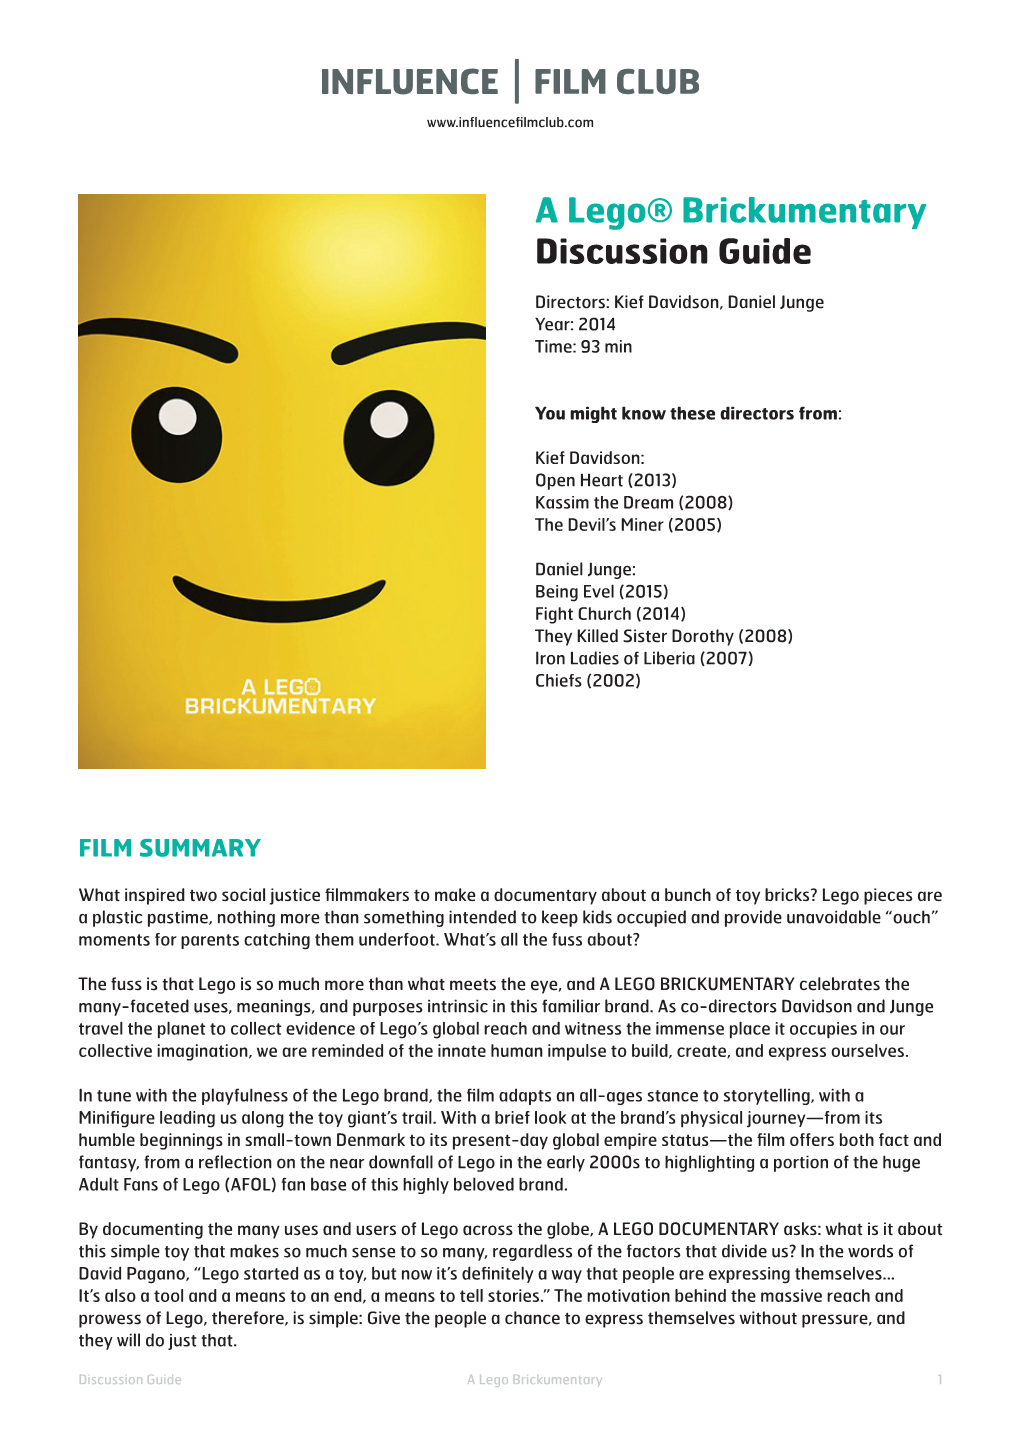 A Lego® Brickumentary Discussion Guide